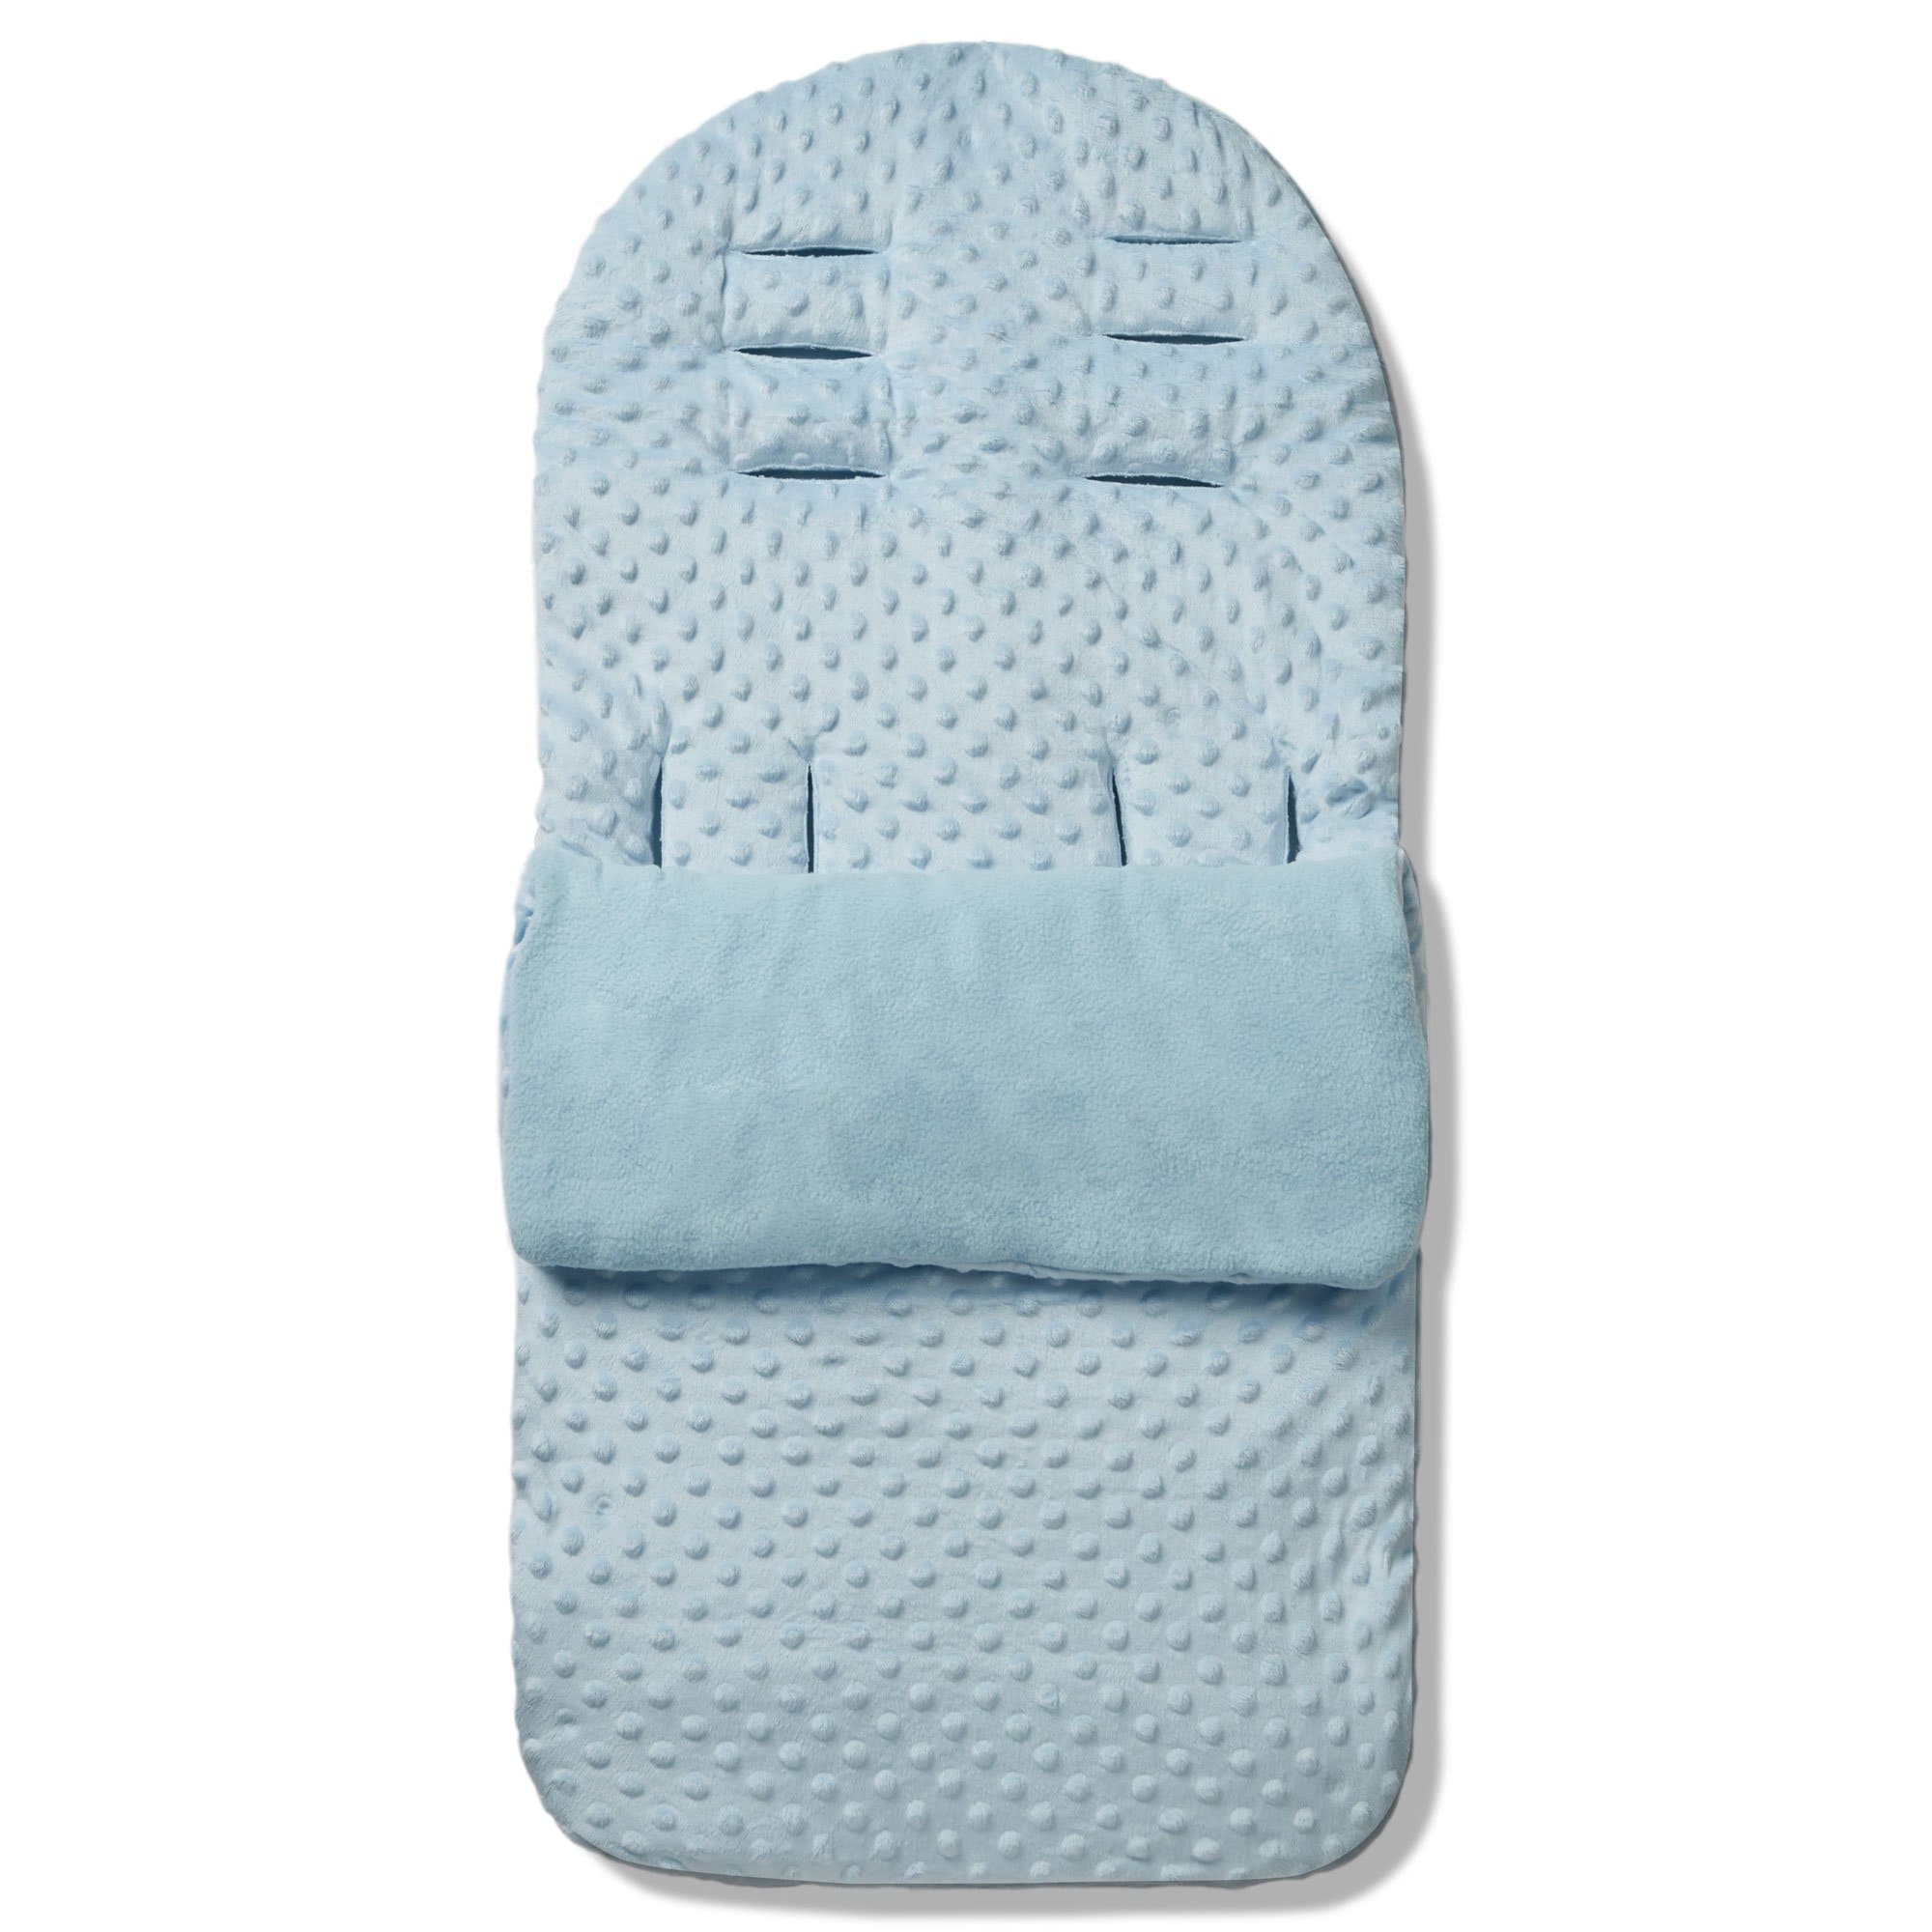 Dimple Footmuff / Cosy Toes Compatible with Red Castle - For Your Little One